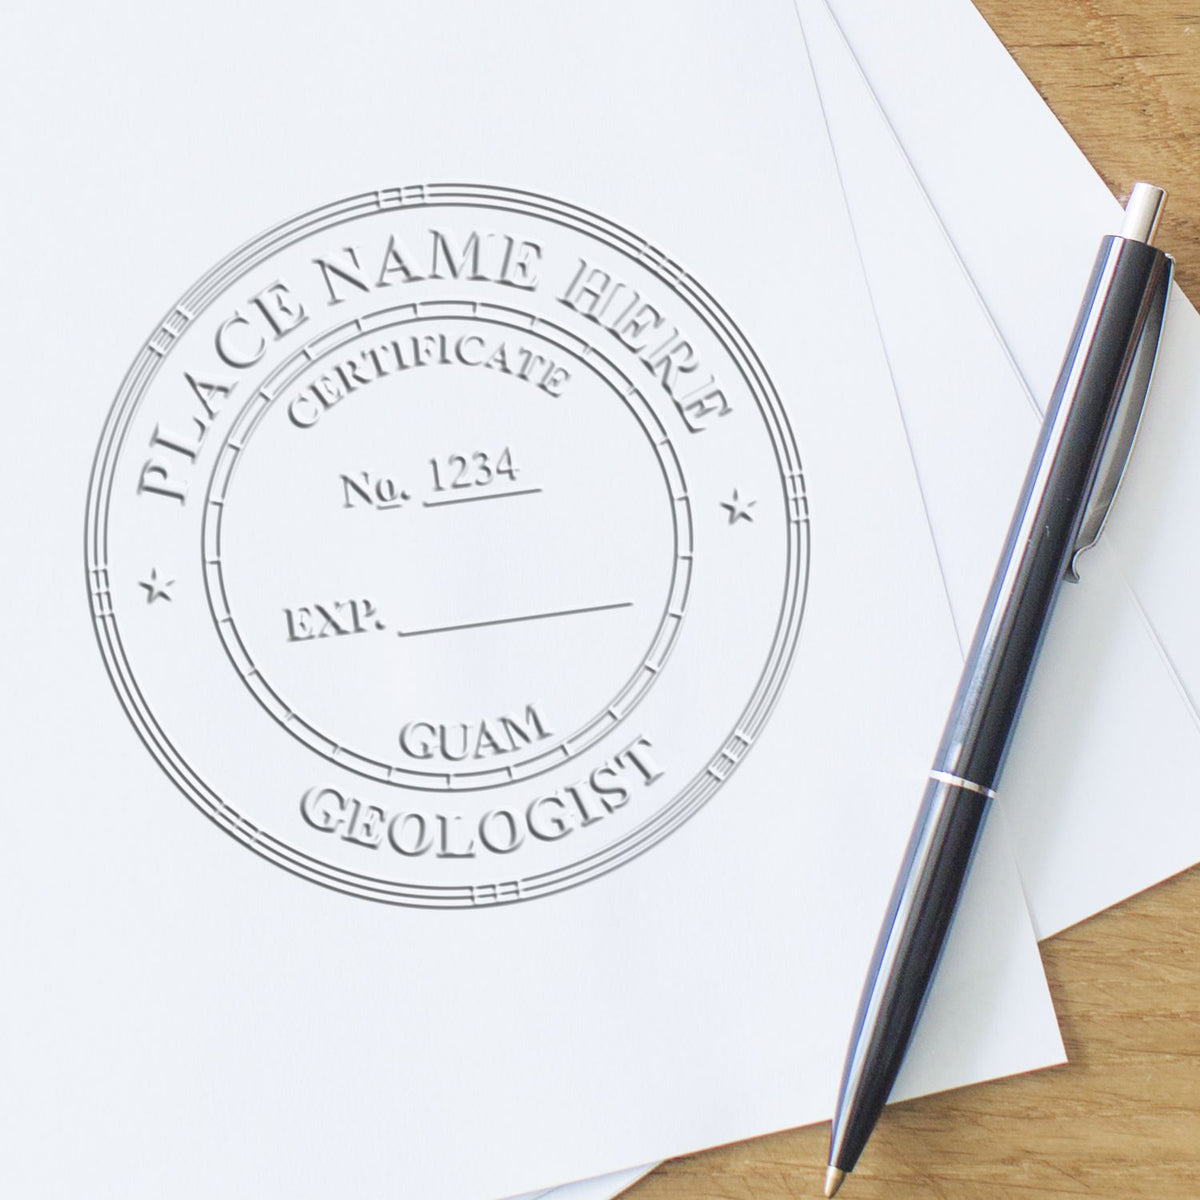 A photograph of the Gift Guam Geologist Seal stamp impression reveals a vivid, professional image of the on paper.